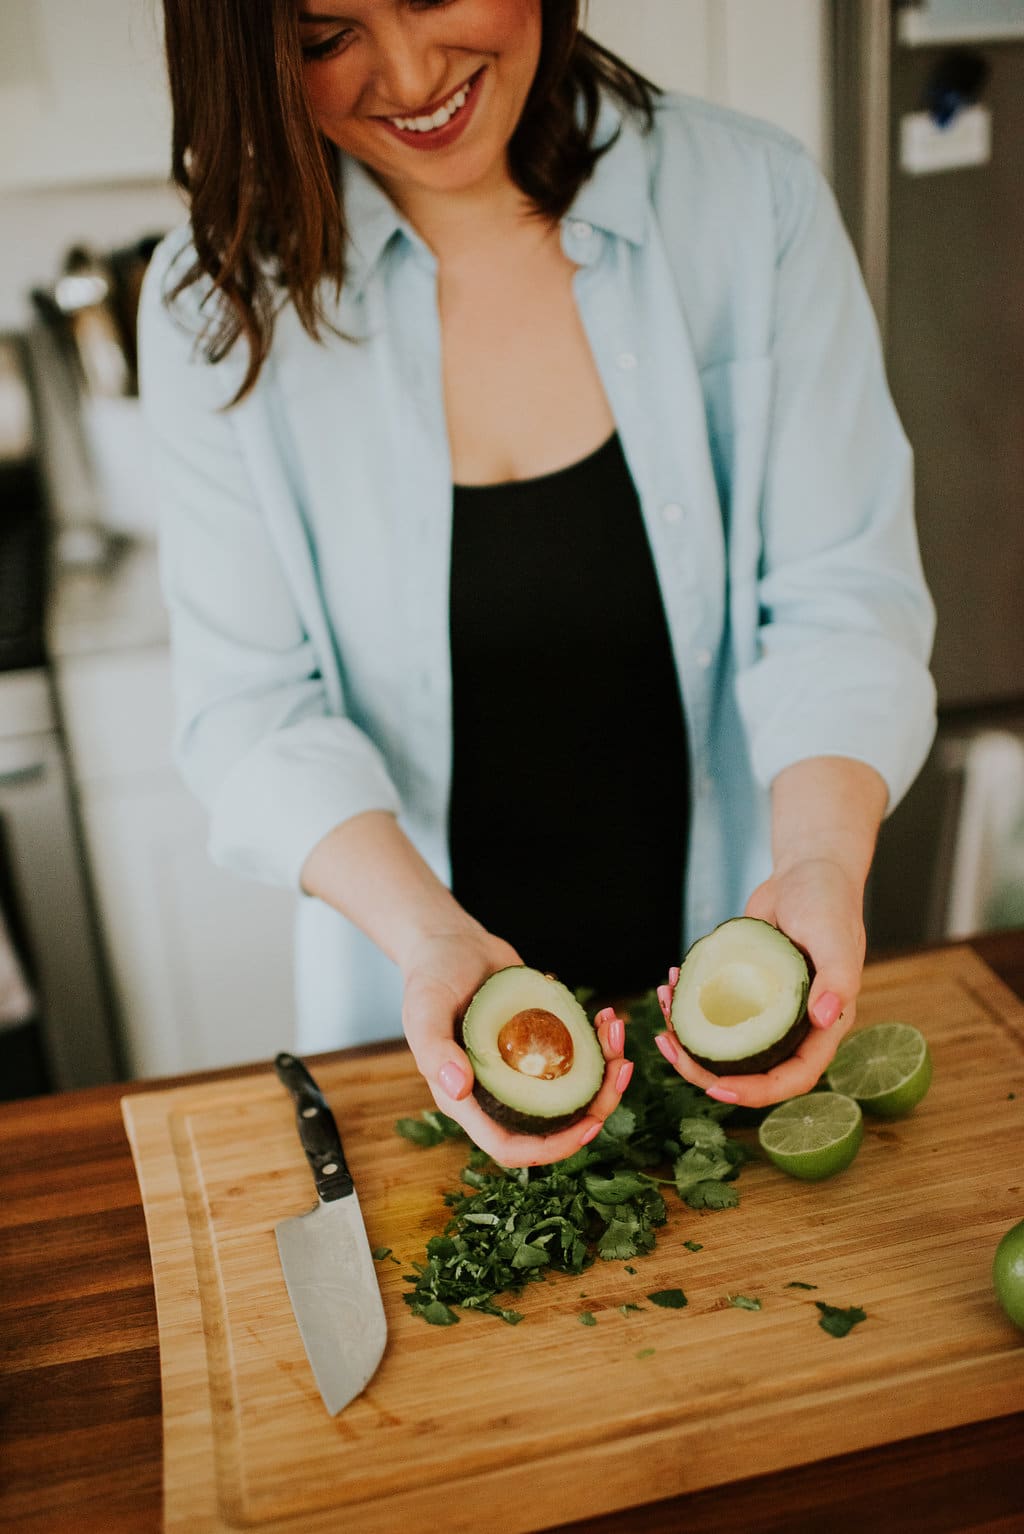 Shot of a woman smiling and holding a halved avocado